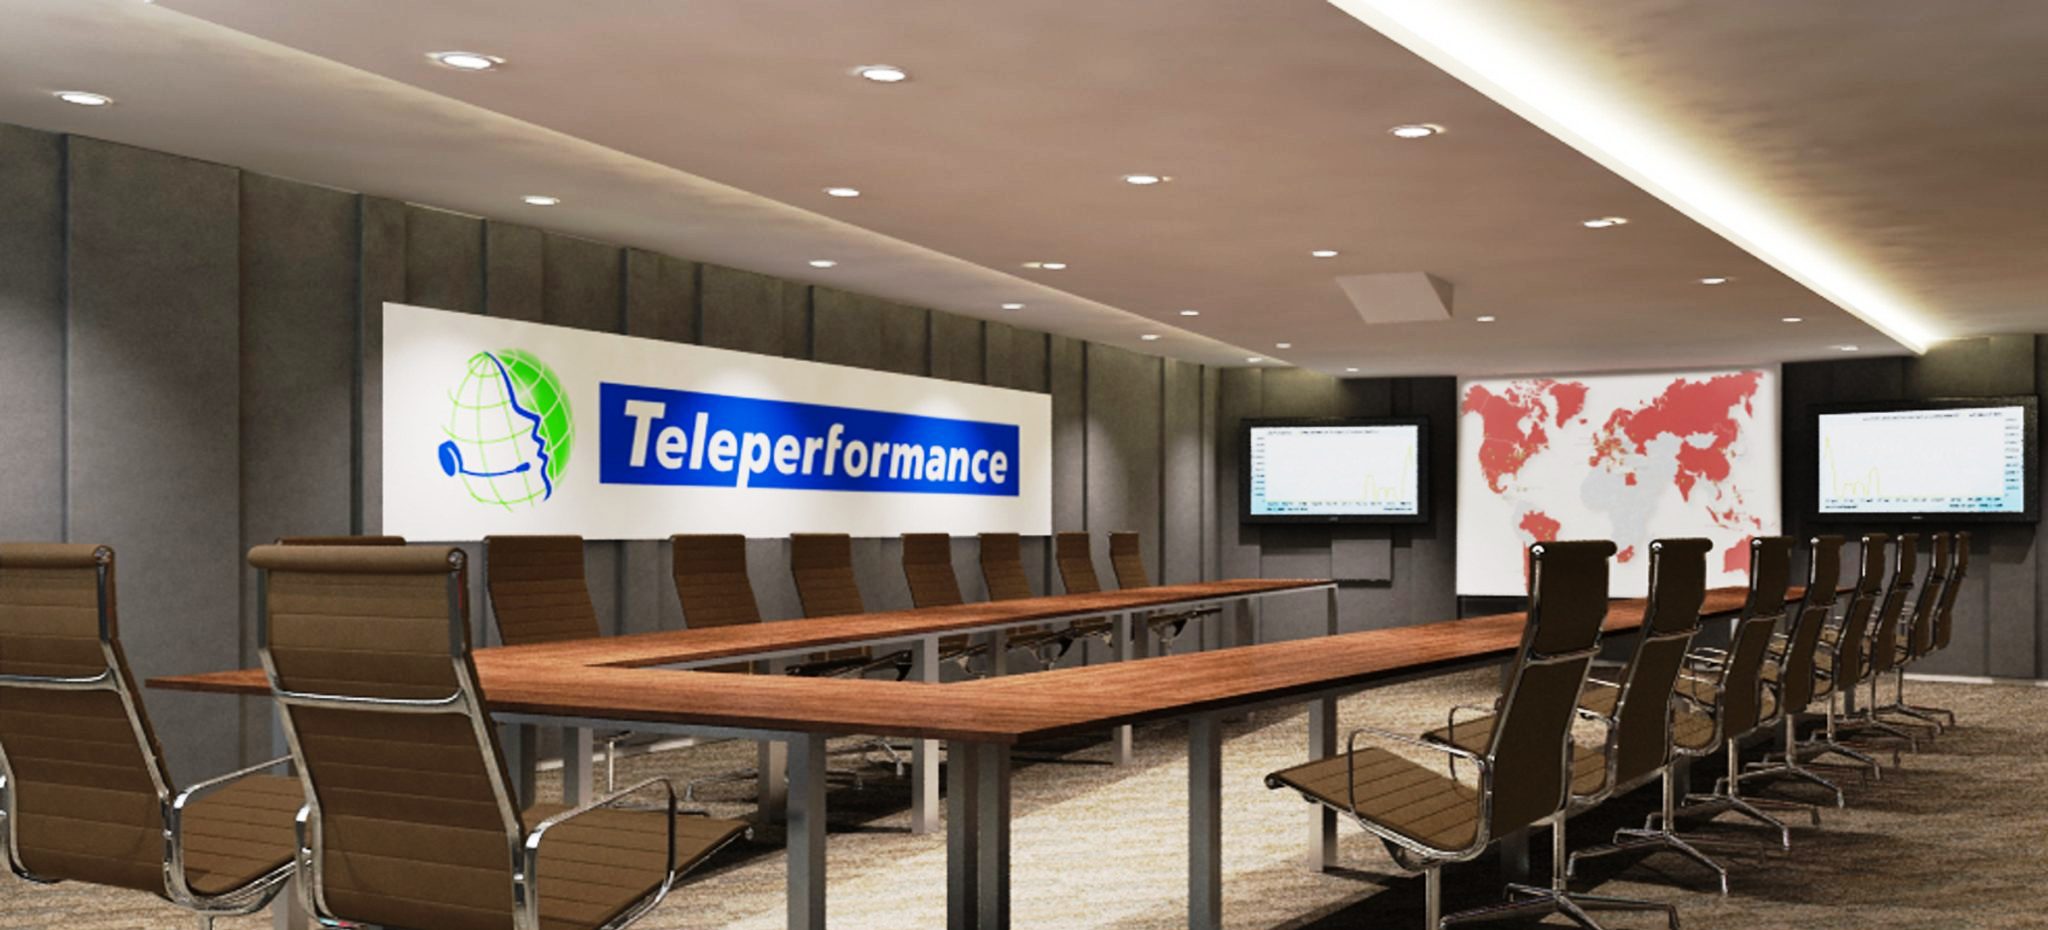 Teleperformance Philippines Managing Director Travis Coates said the company will continue to expand, driven by strong demand from clients in North America.